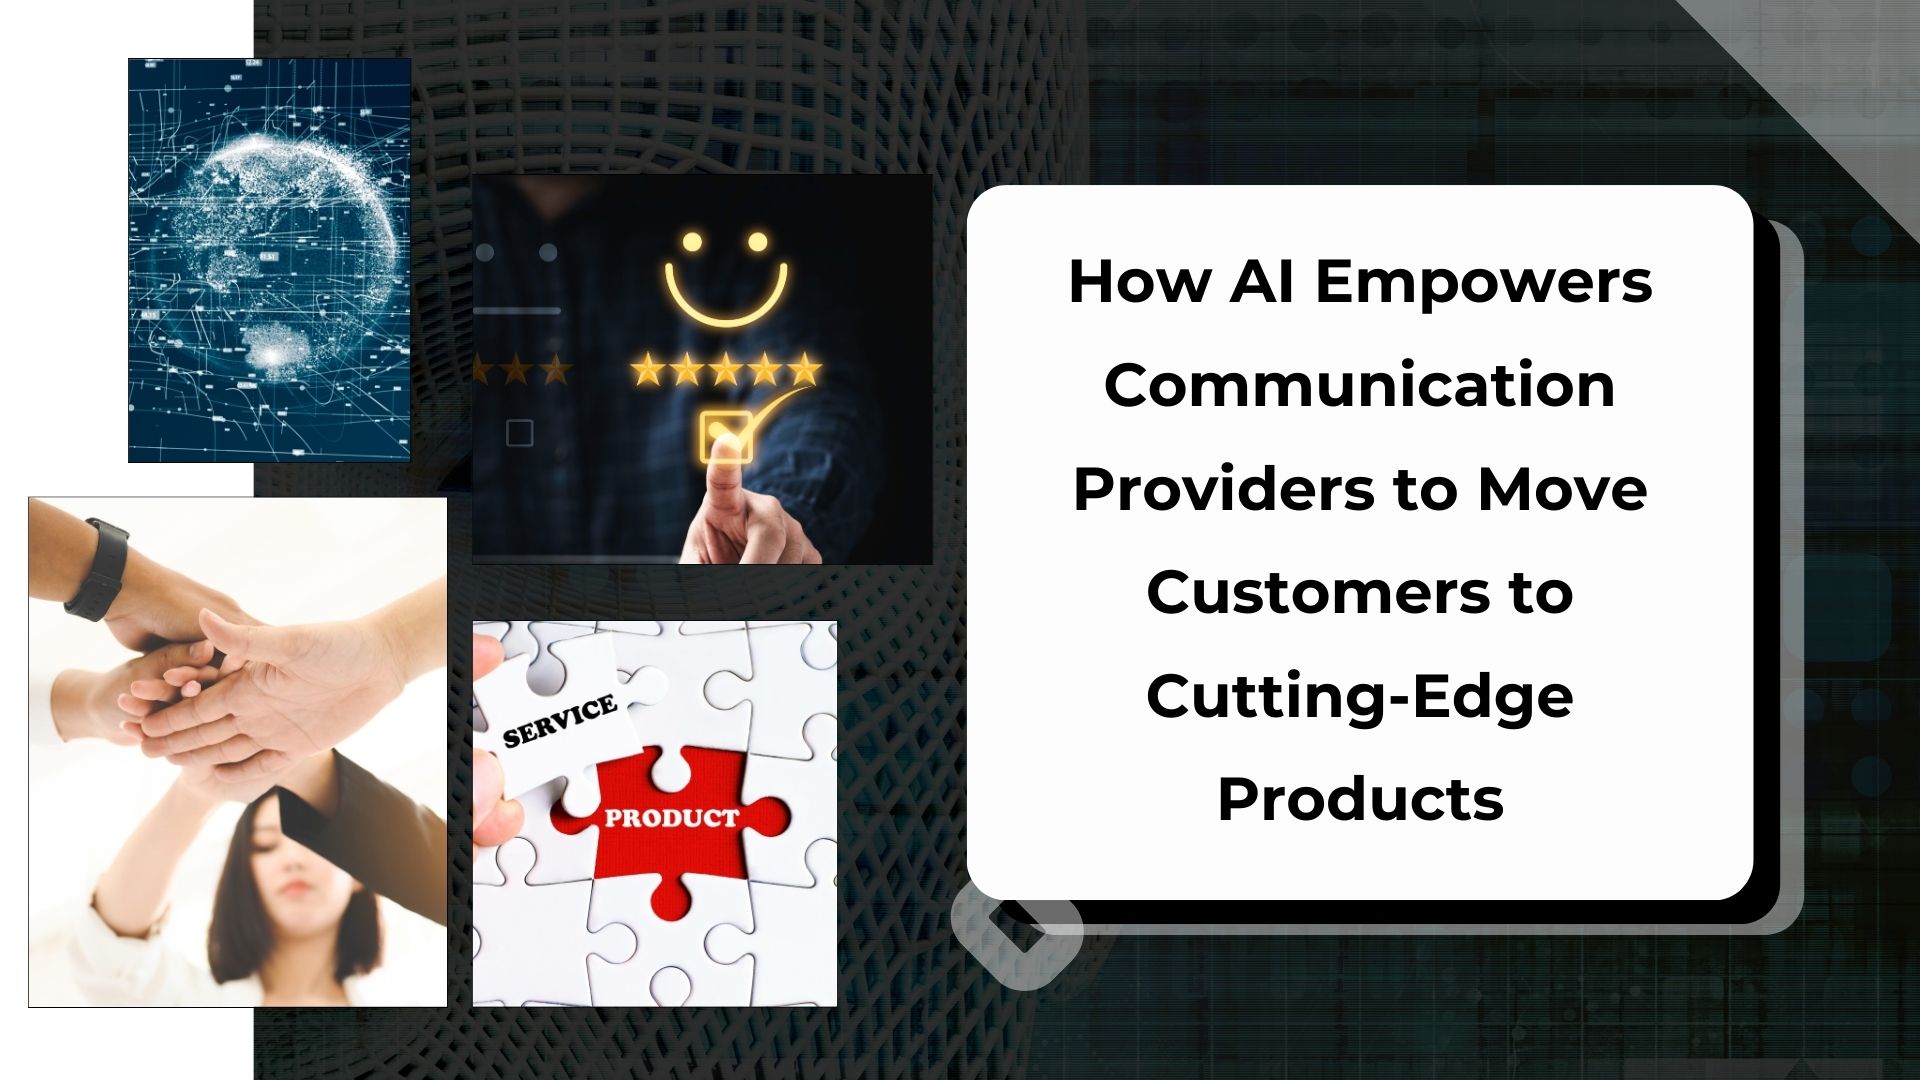 How AI Empowers Communication Providers to Move Customers to Cutting-Edge Products